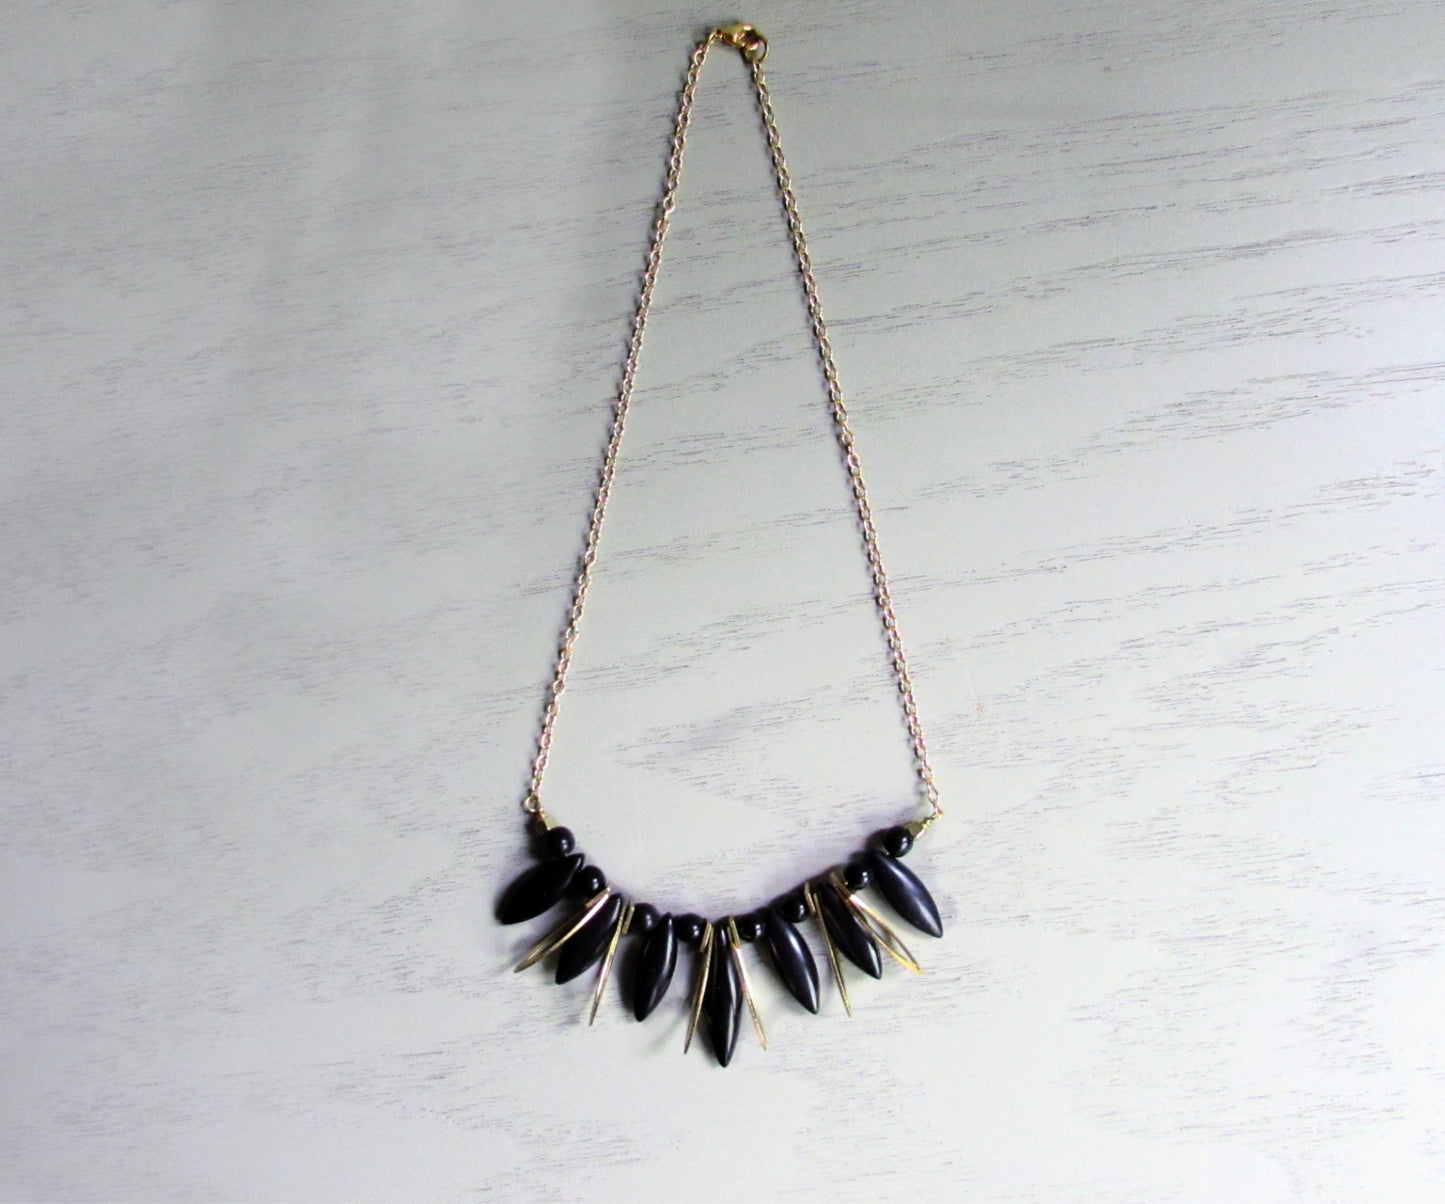 Black and Gold Marquise Spike Necklace, Black Bib Necklace, Boho Fan Necklace, Marquise Fringe Necklace, Short Collar Geometric Necklace